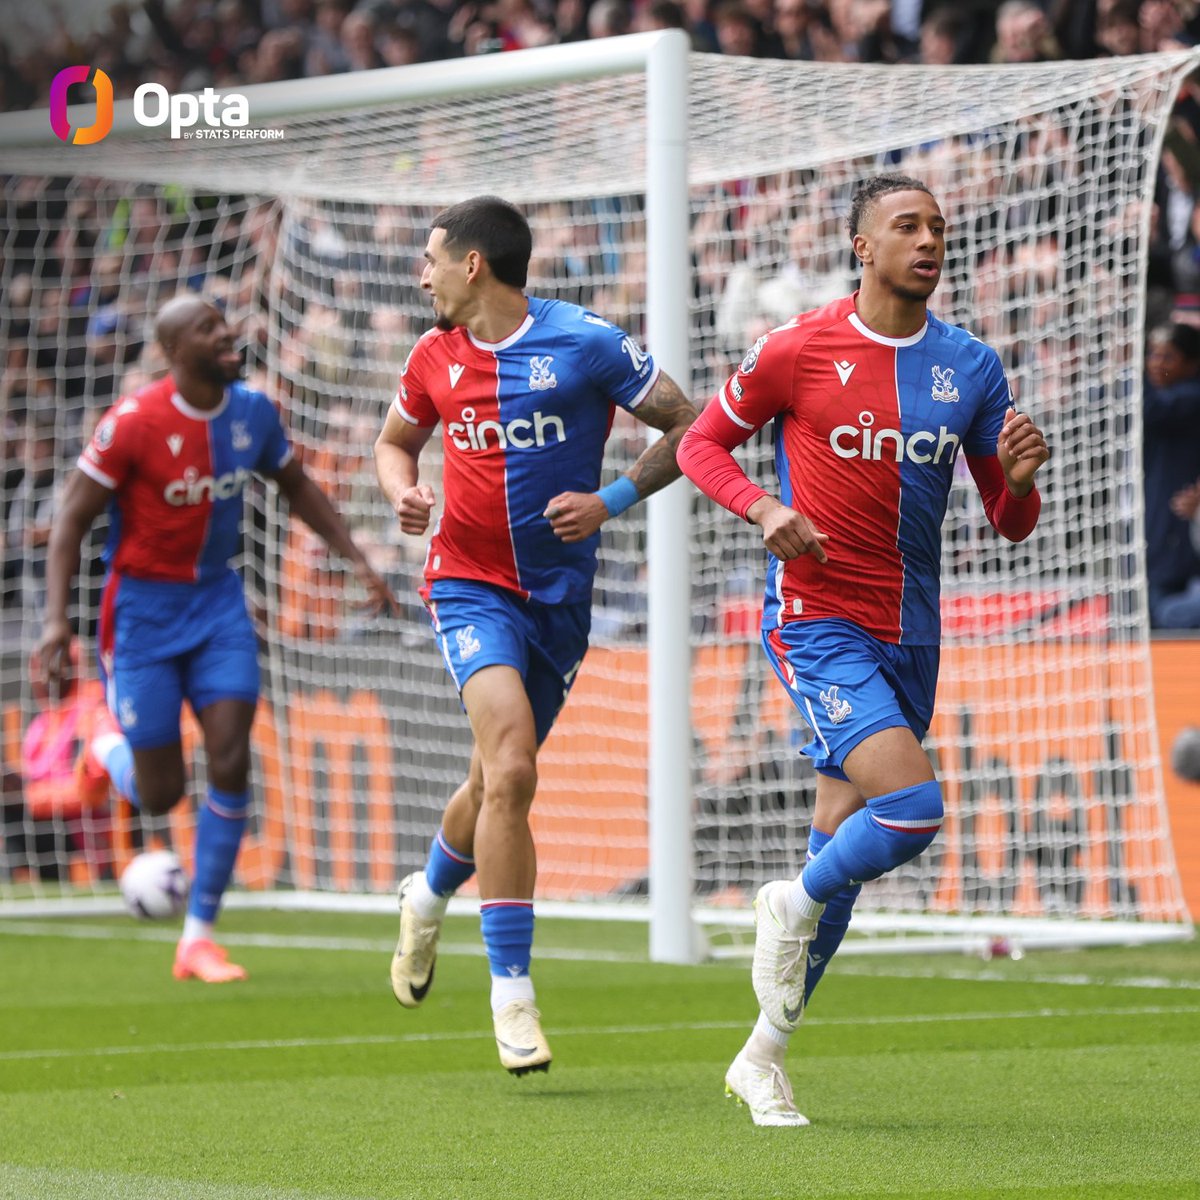 3-0 - With just 20 minutes played against West Ham, this is the earliest Crystal Palace have ever been 3-0 up in a Premier League match. Cruising.